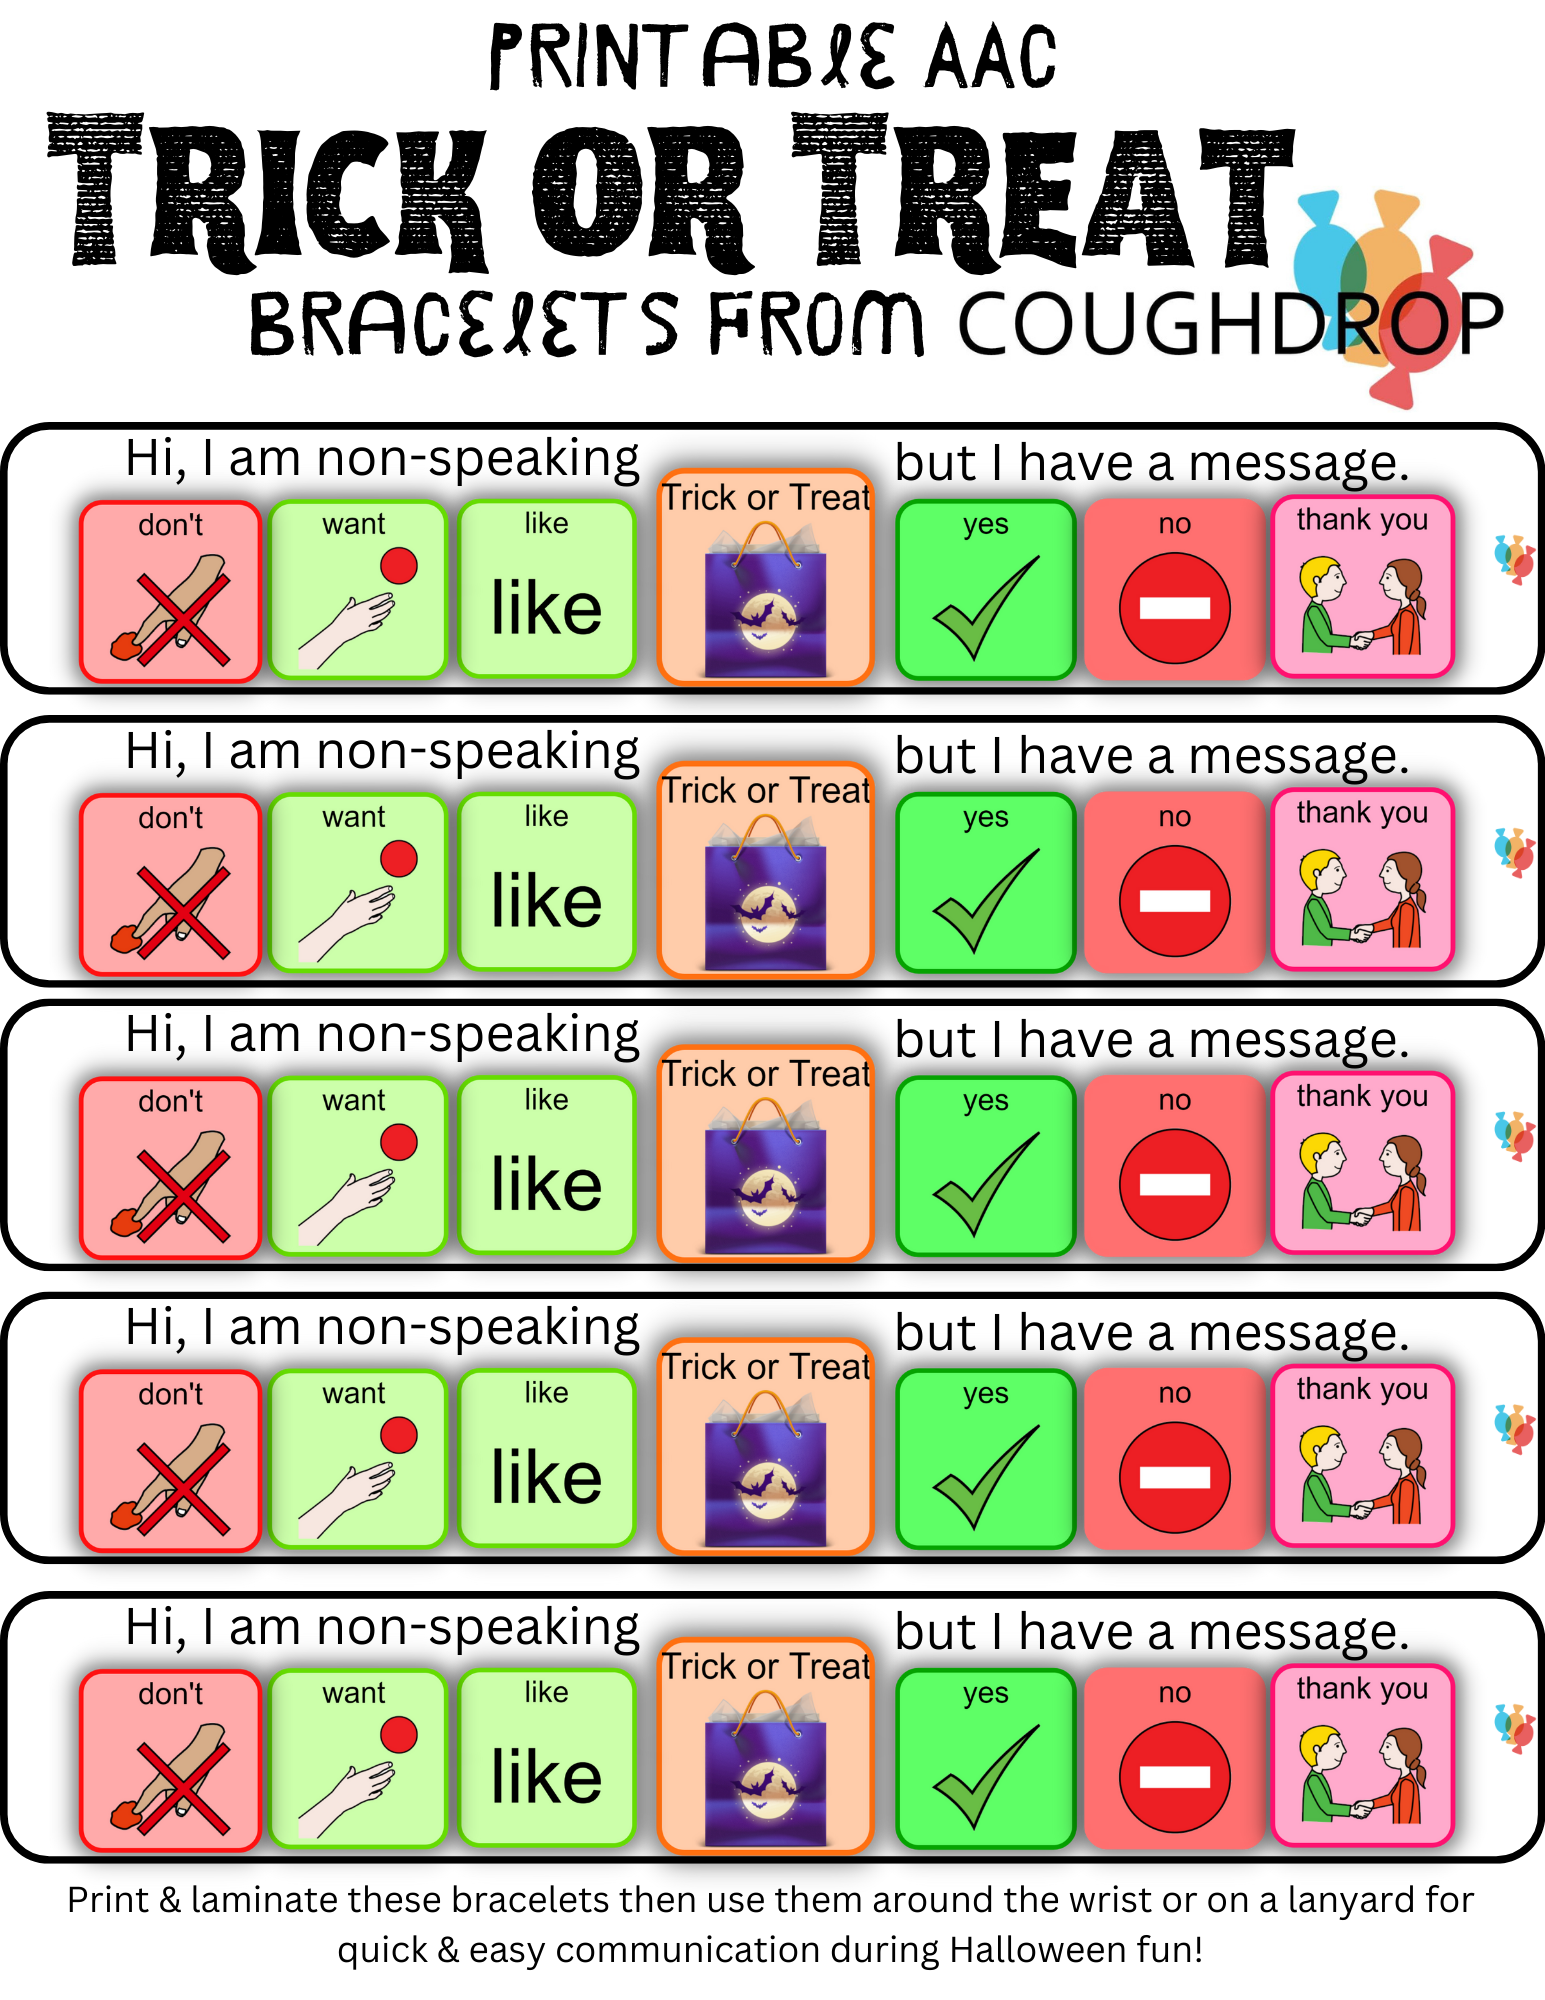 Heading reads "Printable AAC Trick-or-Treat Bracelets from CoughDrop."  Below the heading are 5 identical strips with speech buttons containing the words "don't" "want" "like" "Trick or Treat" "yes" "no" and "thank you.  